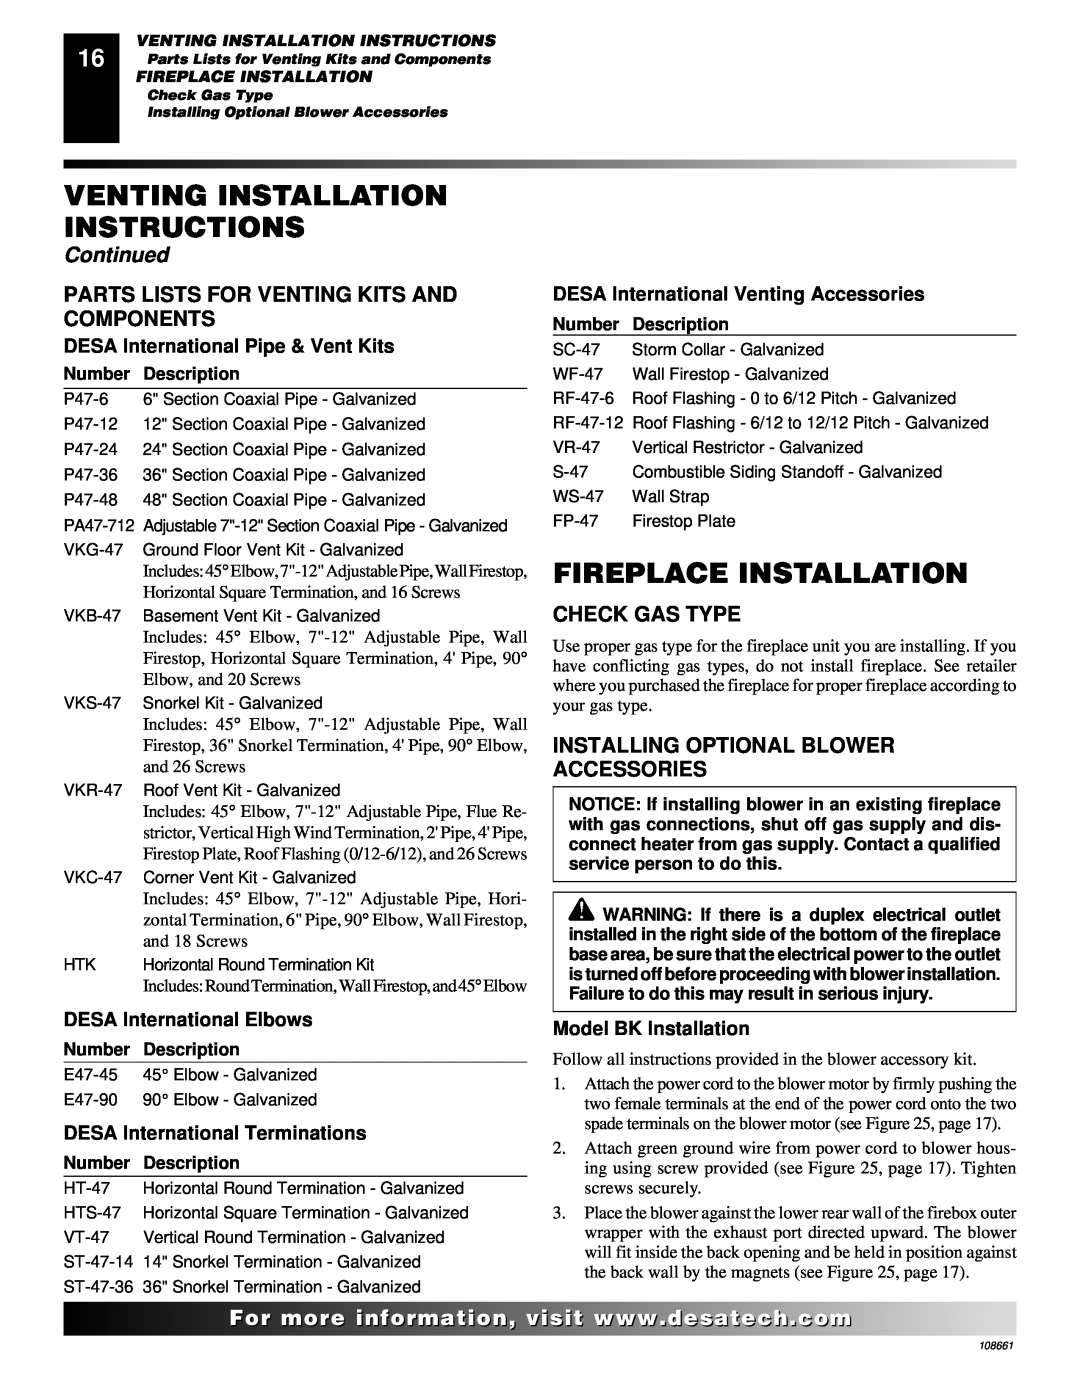 Desa T32N, T36N, T32P, T36P Fireplace Installation, Venting Installation Instructions, Continued, Model BK Installation 